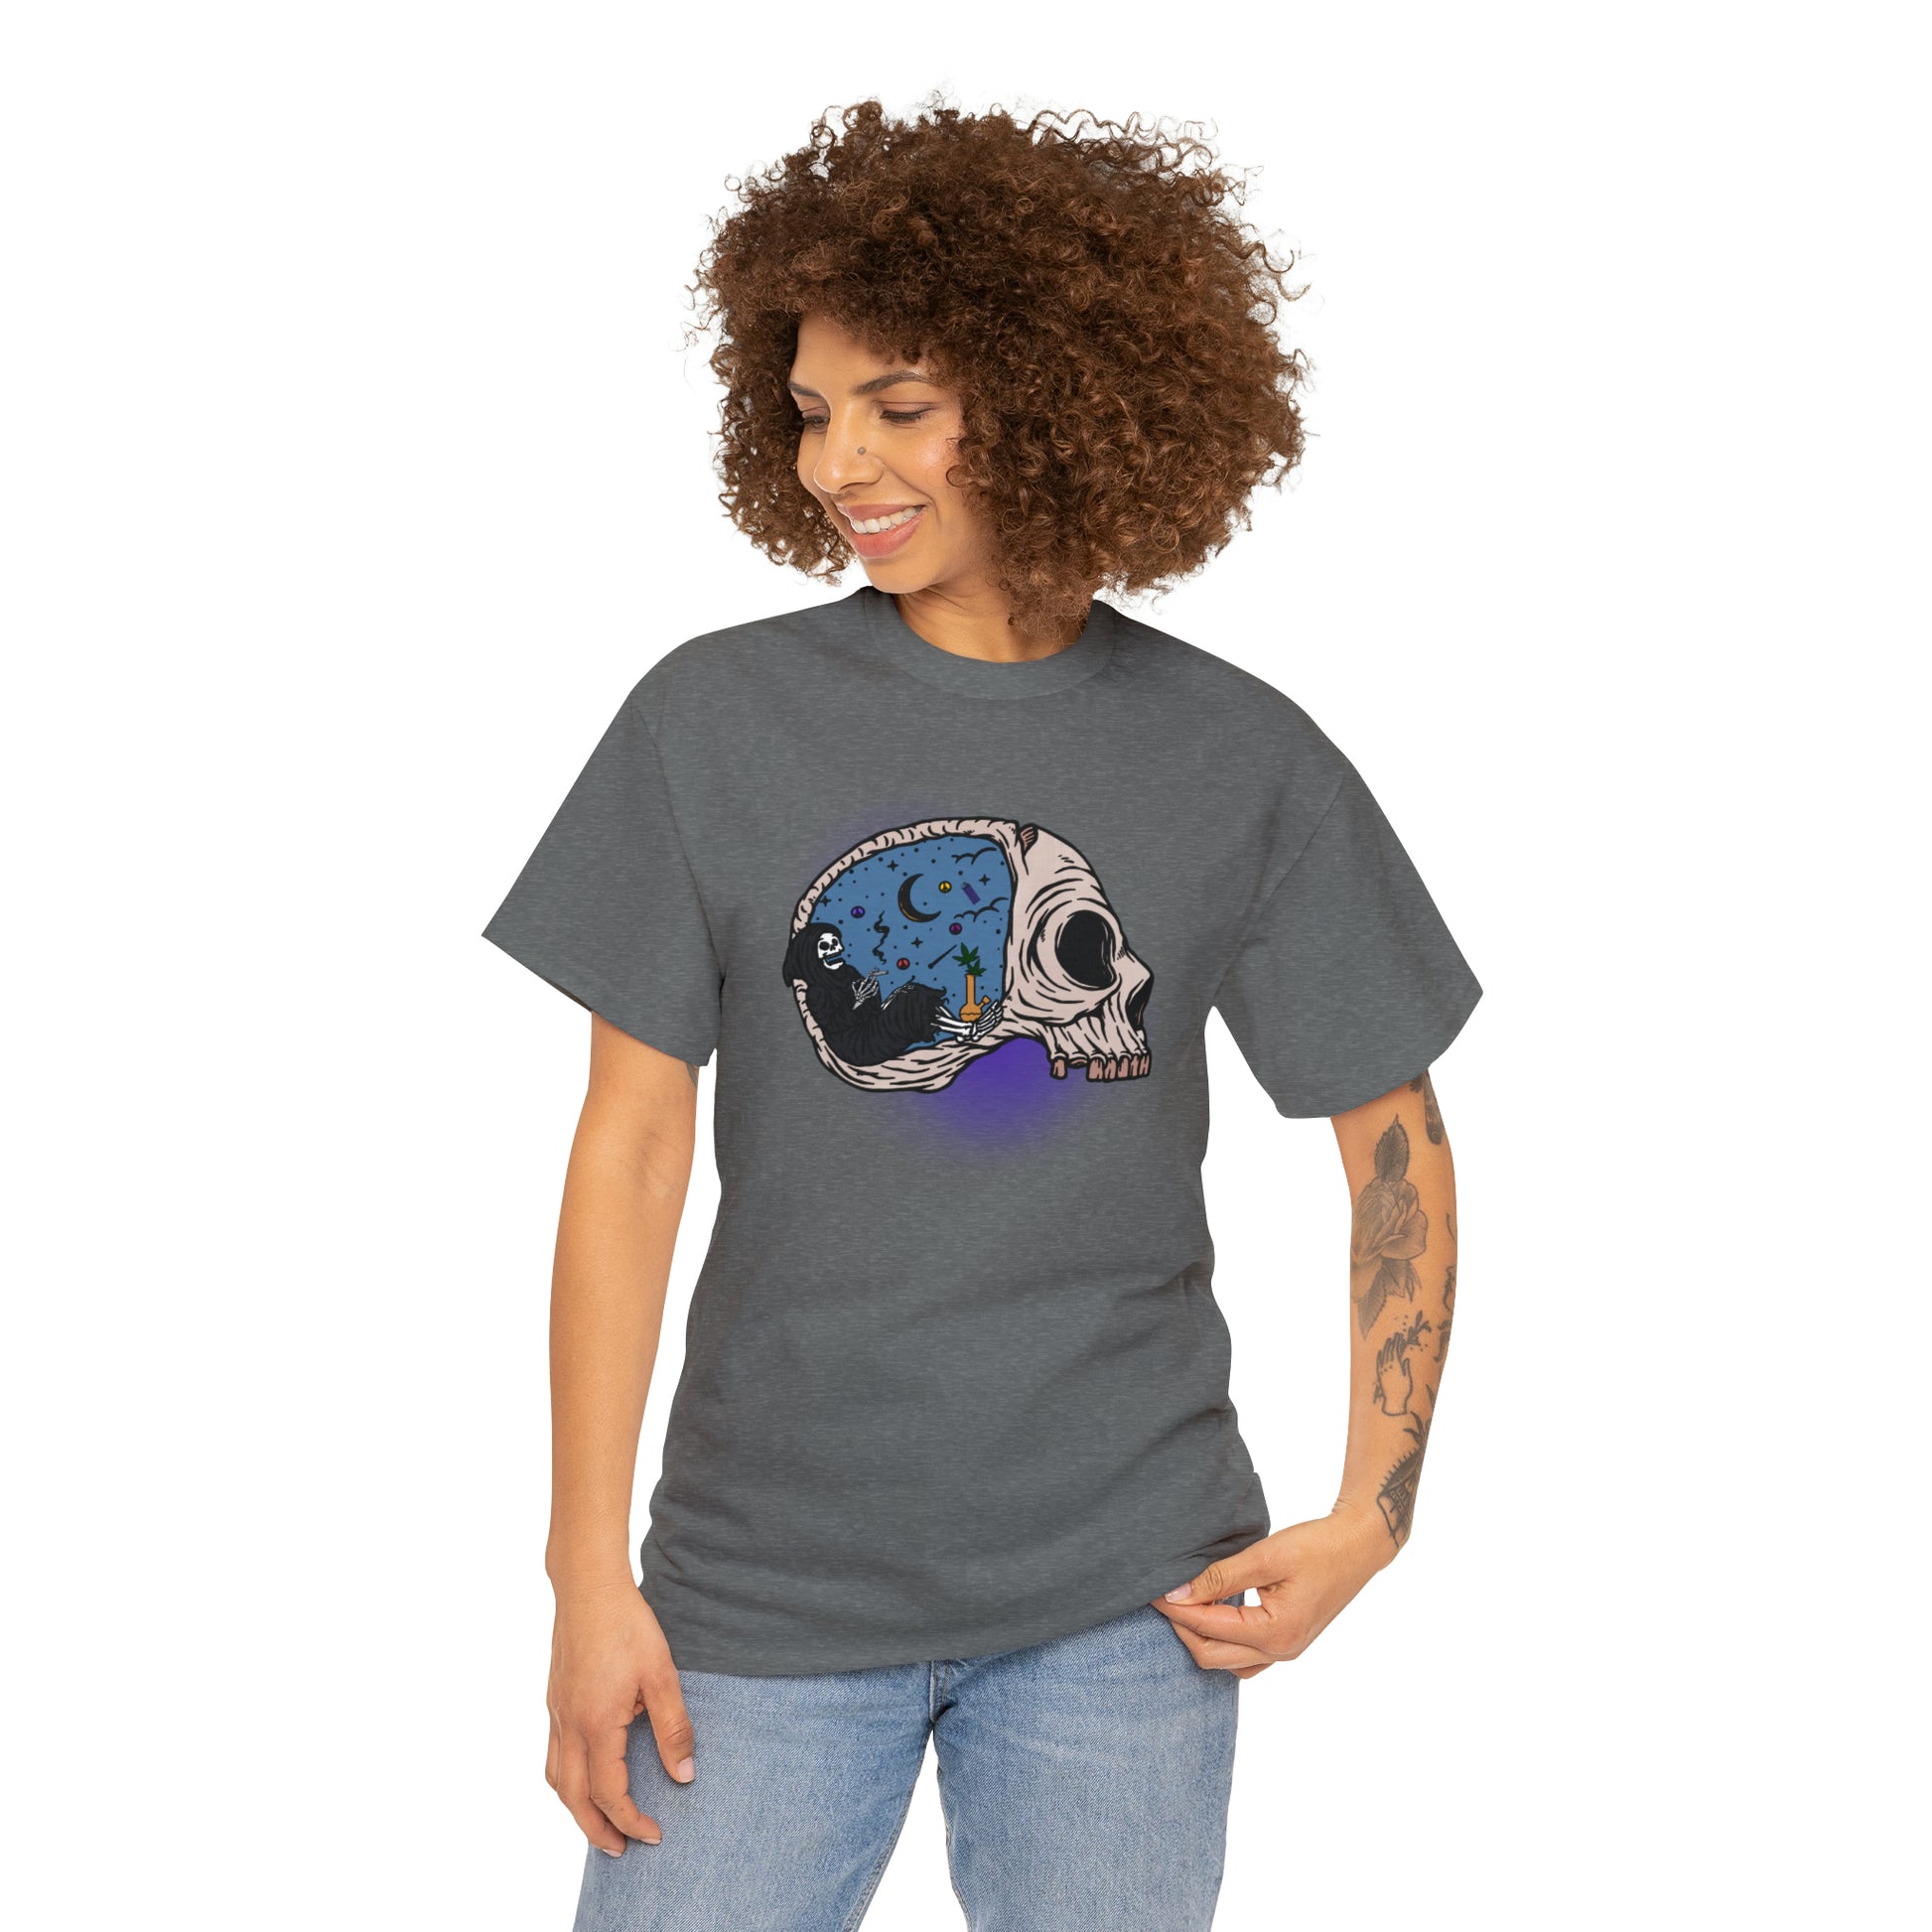 "Grim Reaper Inside Skull Smoking Cannabis" T-Shirt - Weave Got Gifts - Unique Gifts You Won’t Find Anywhere Else!